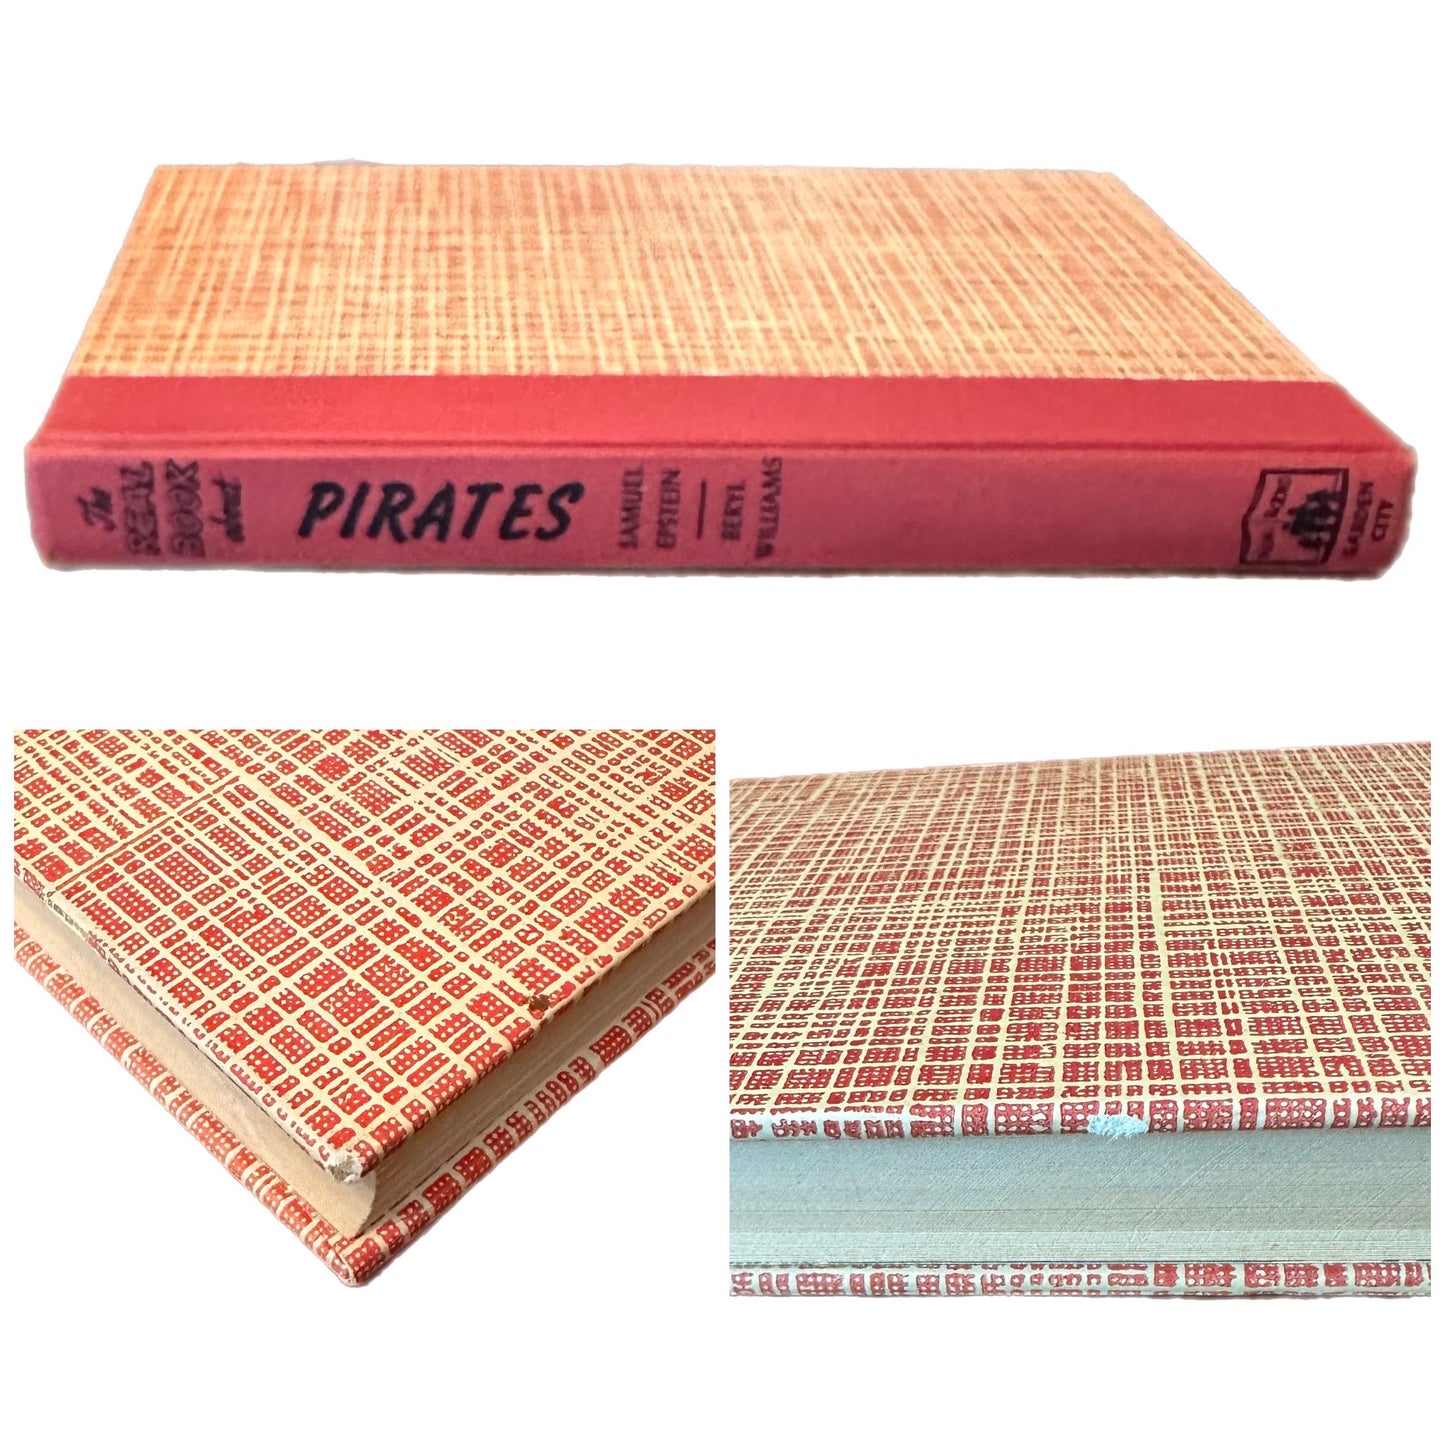 THE REAL BOOK ABOUT PIRATES [REAL BOOK SERIES] (1952) by Samuel Epstein and Beryl Williams